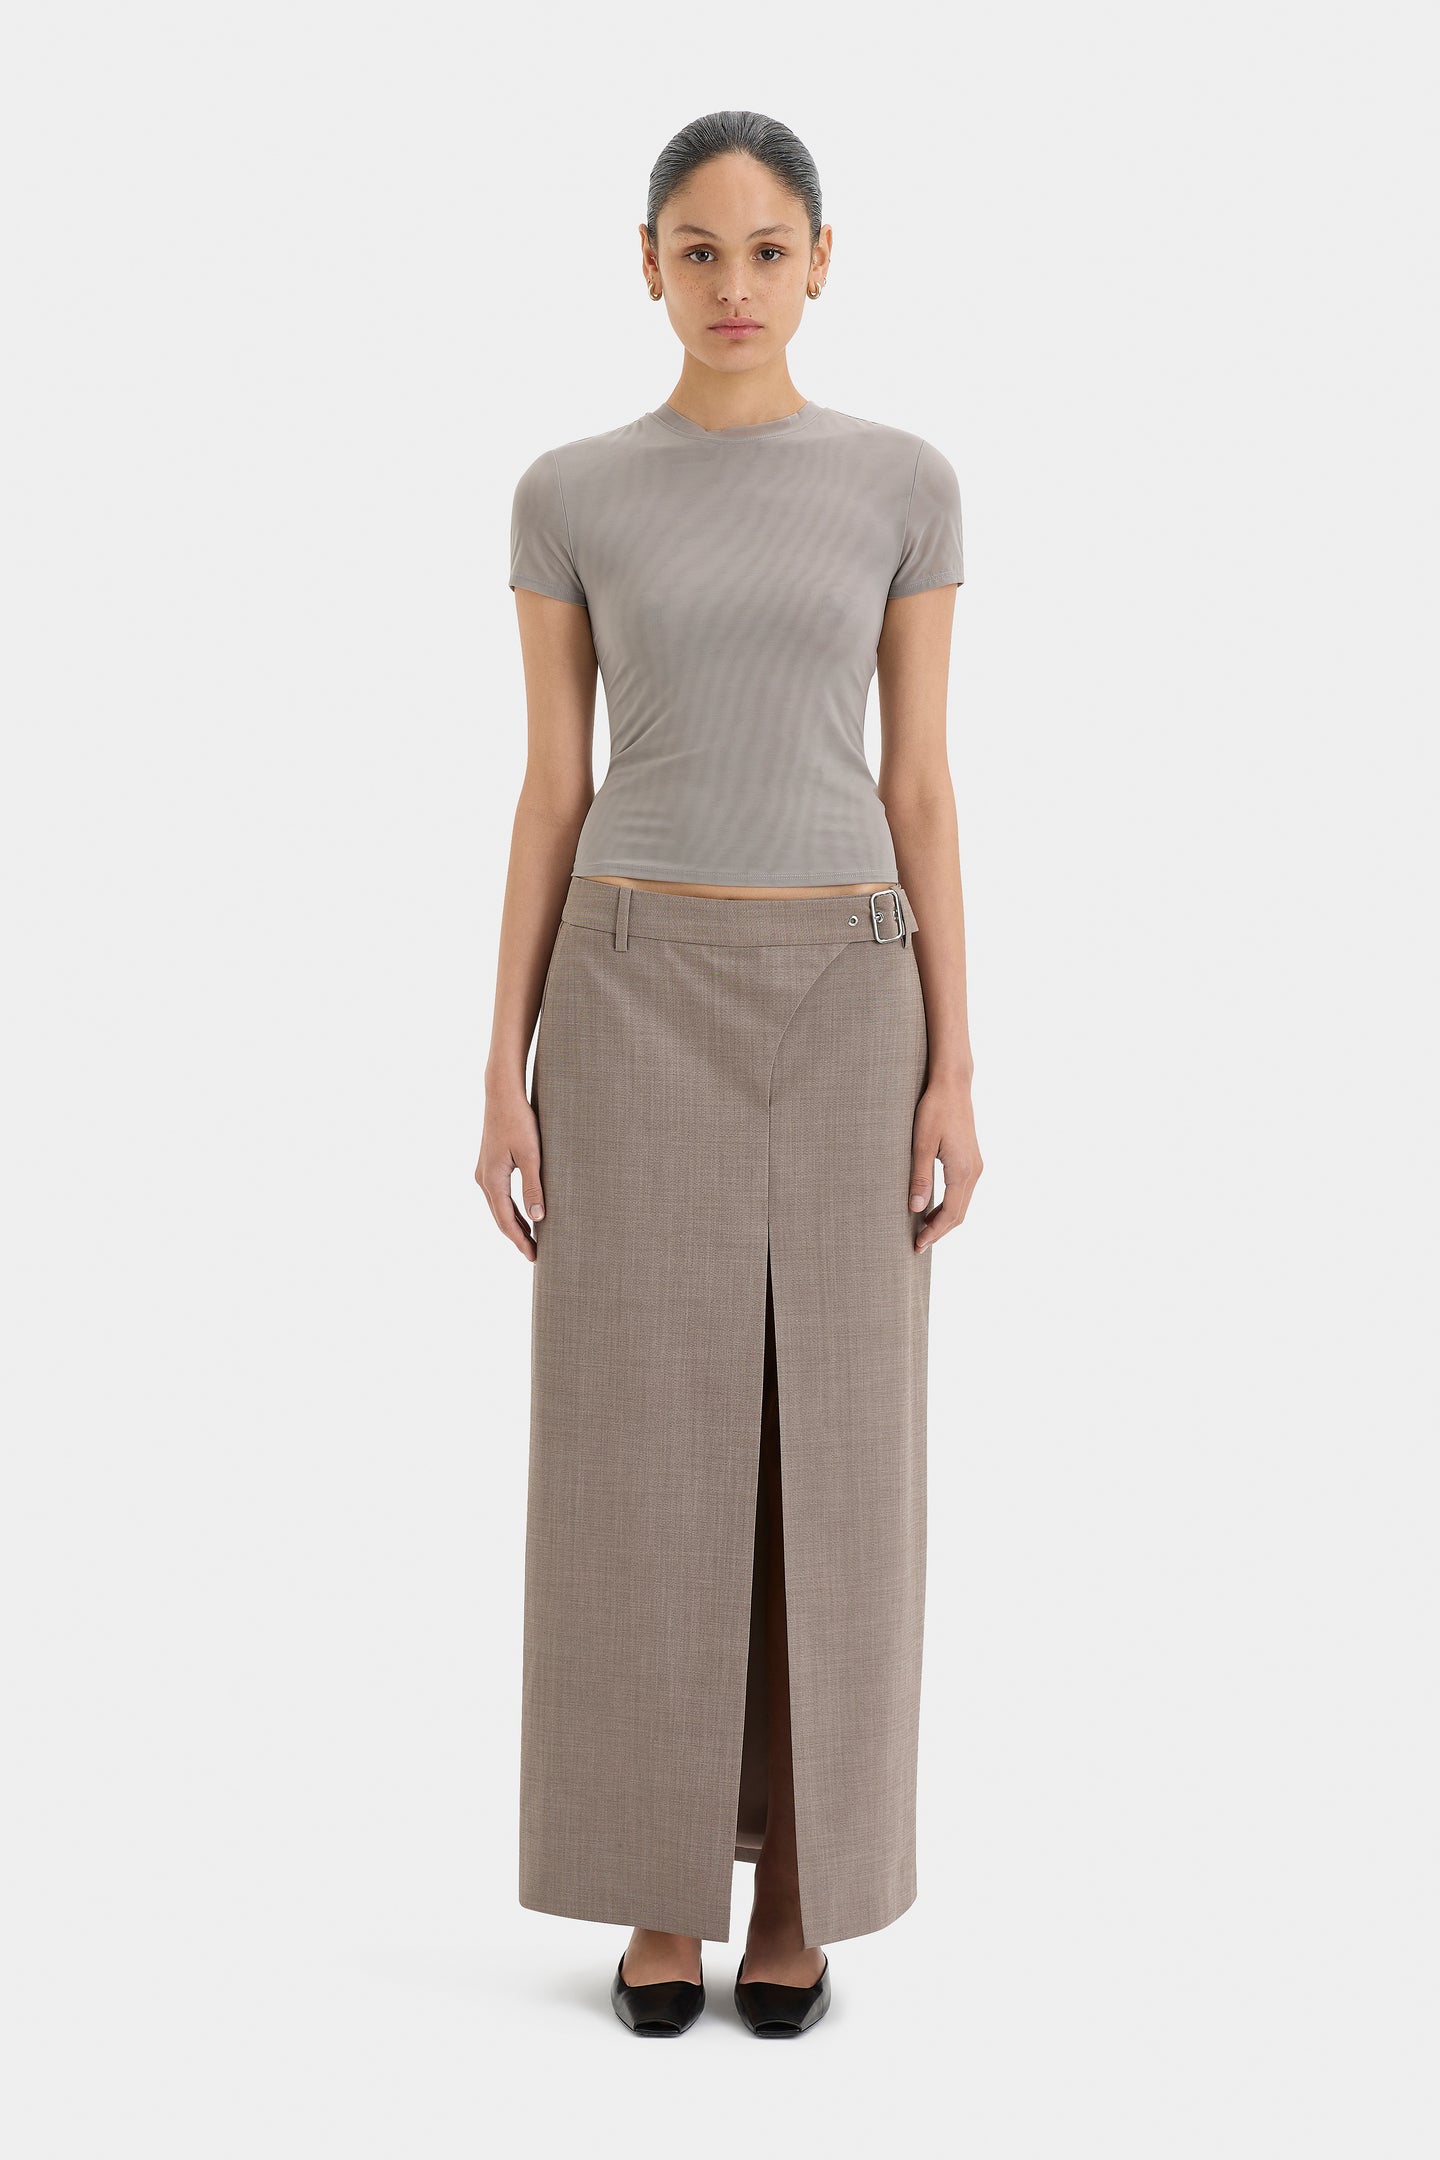 SIR the label Leonardo Belted Skirt TAUPE